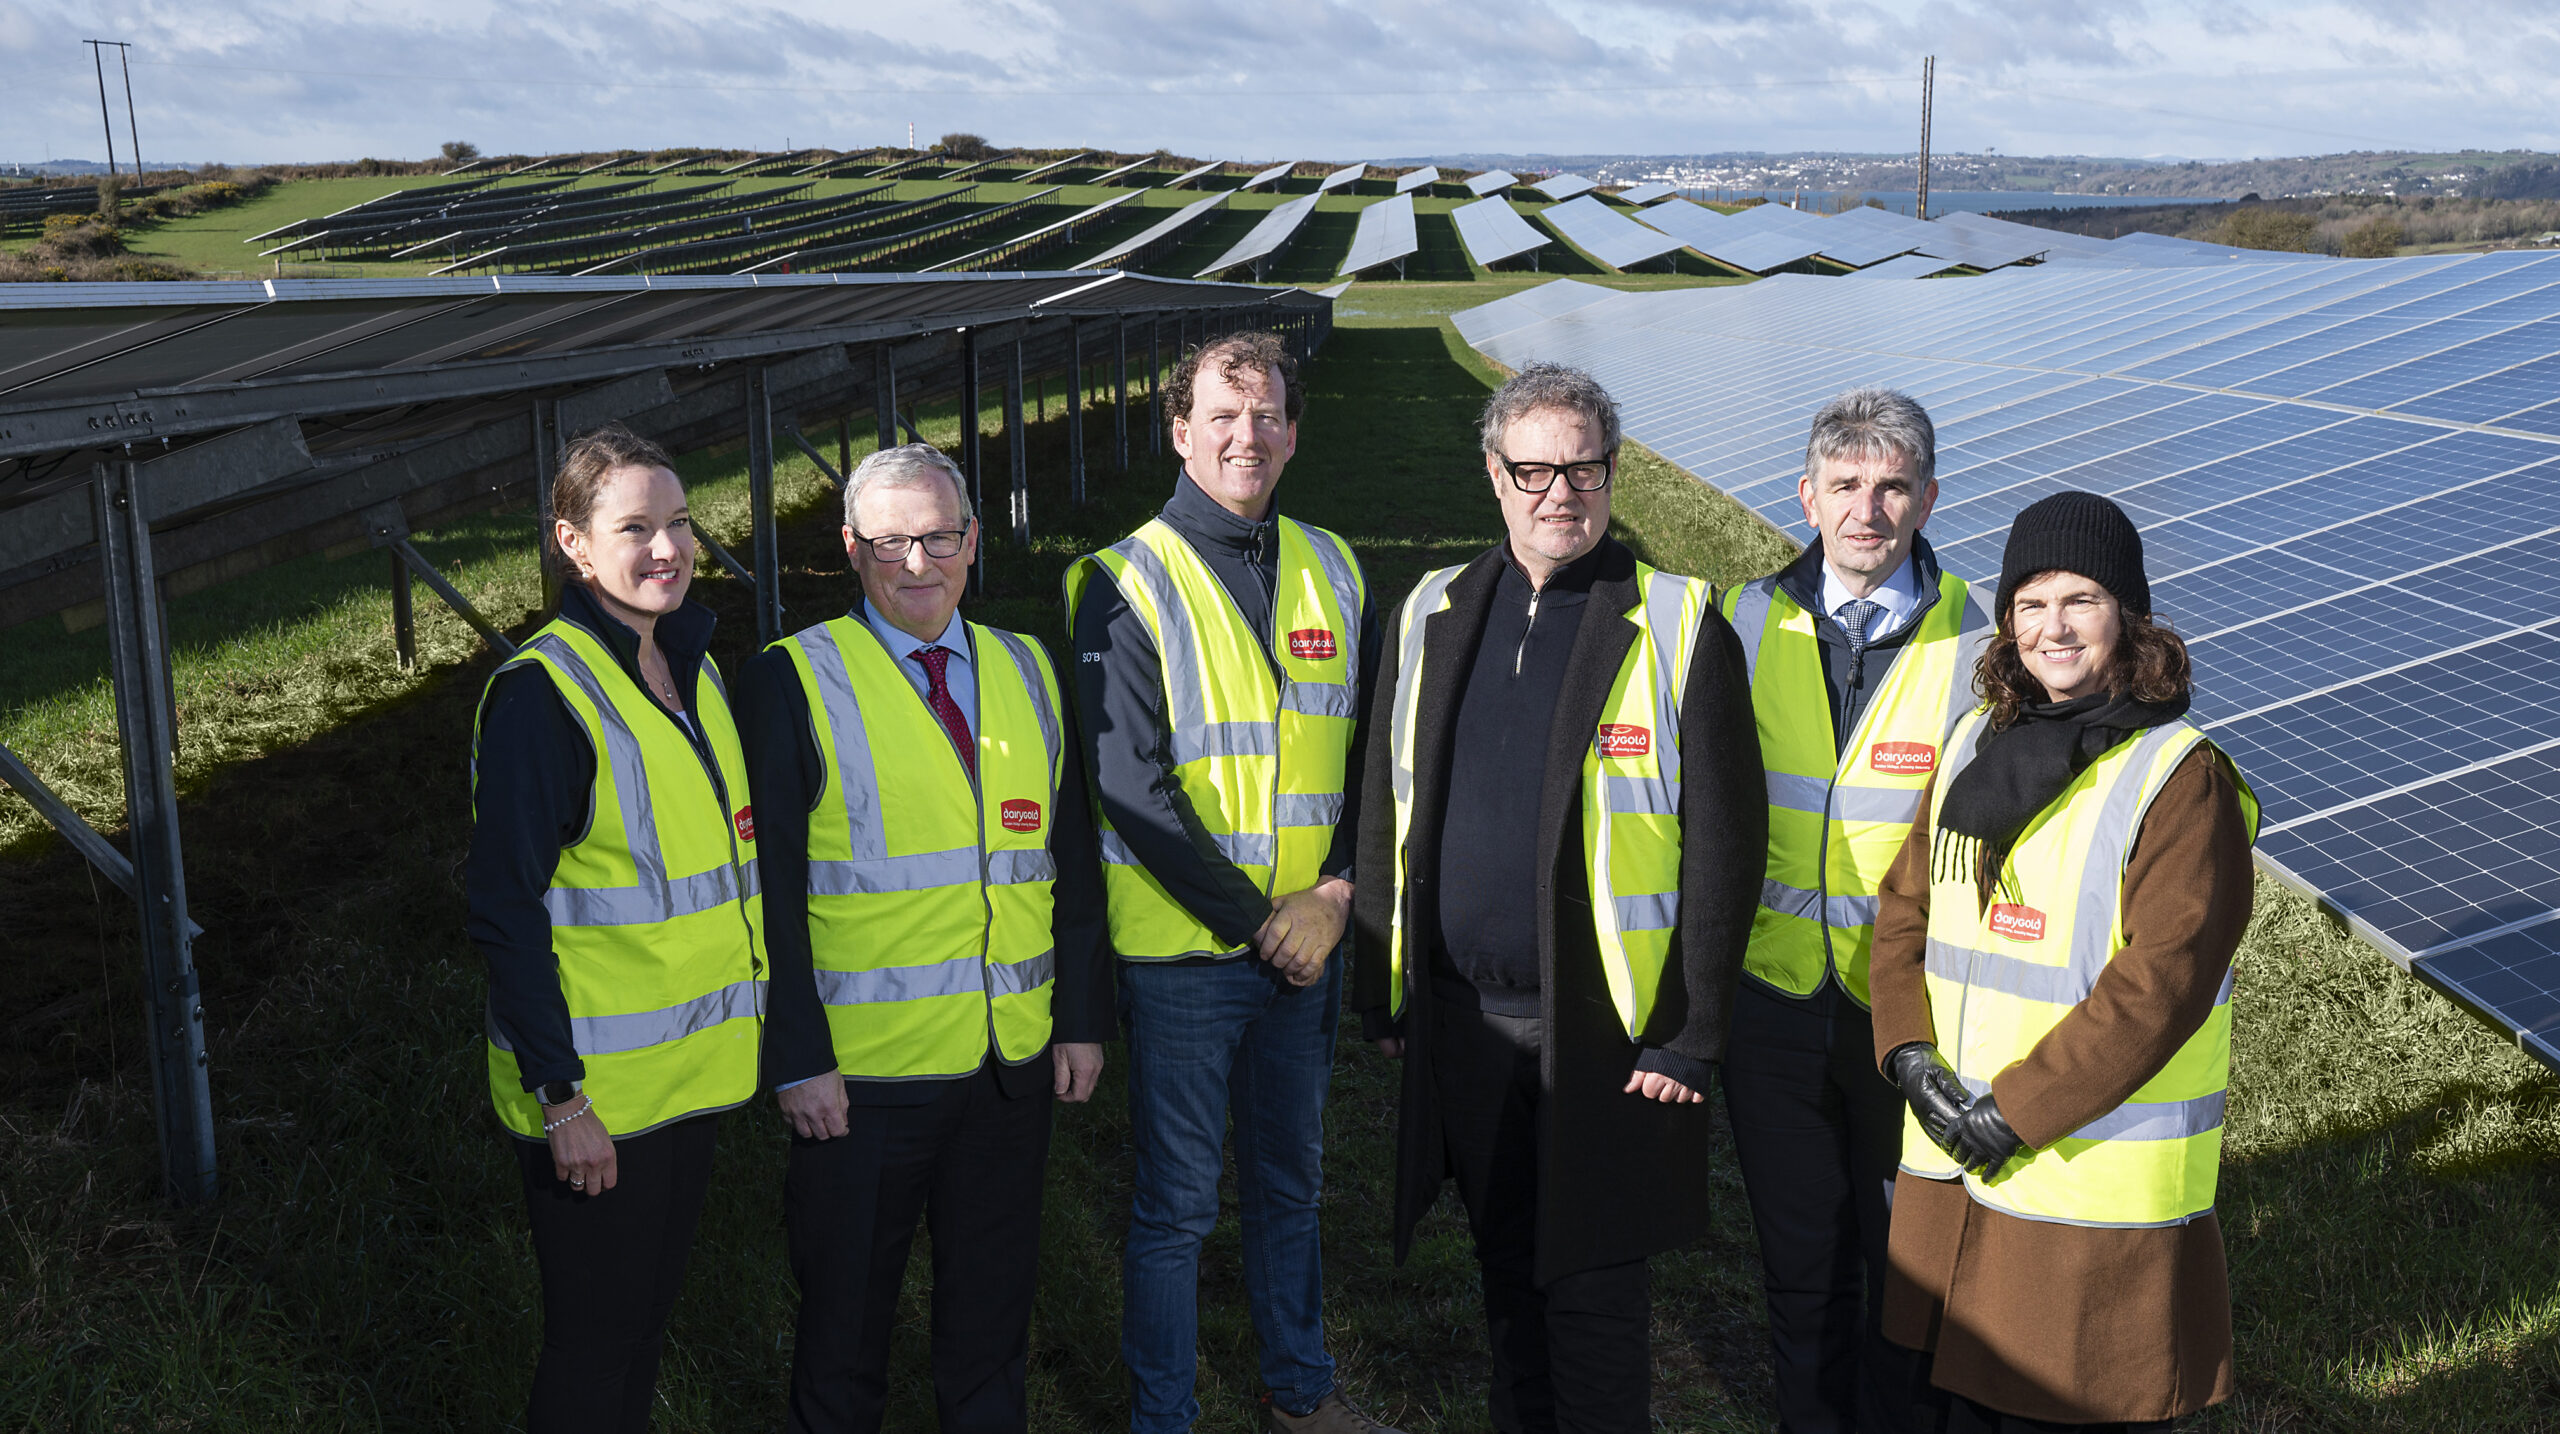 Dairygold to power its processing plants with renewable solar electricity from Co-Op member’s farm